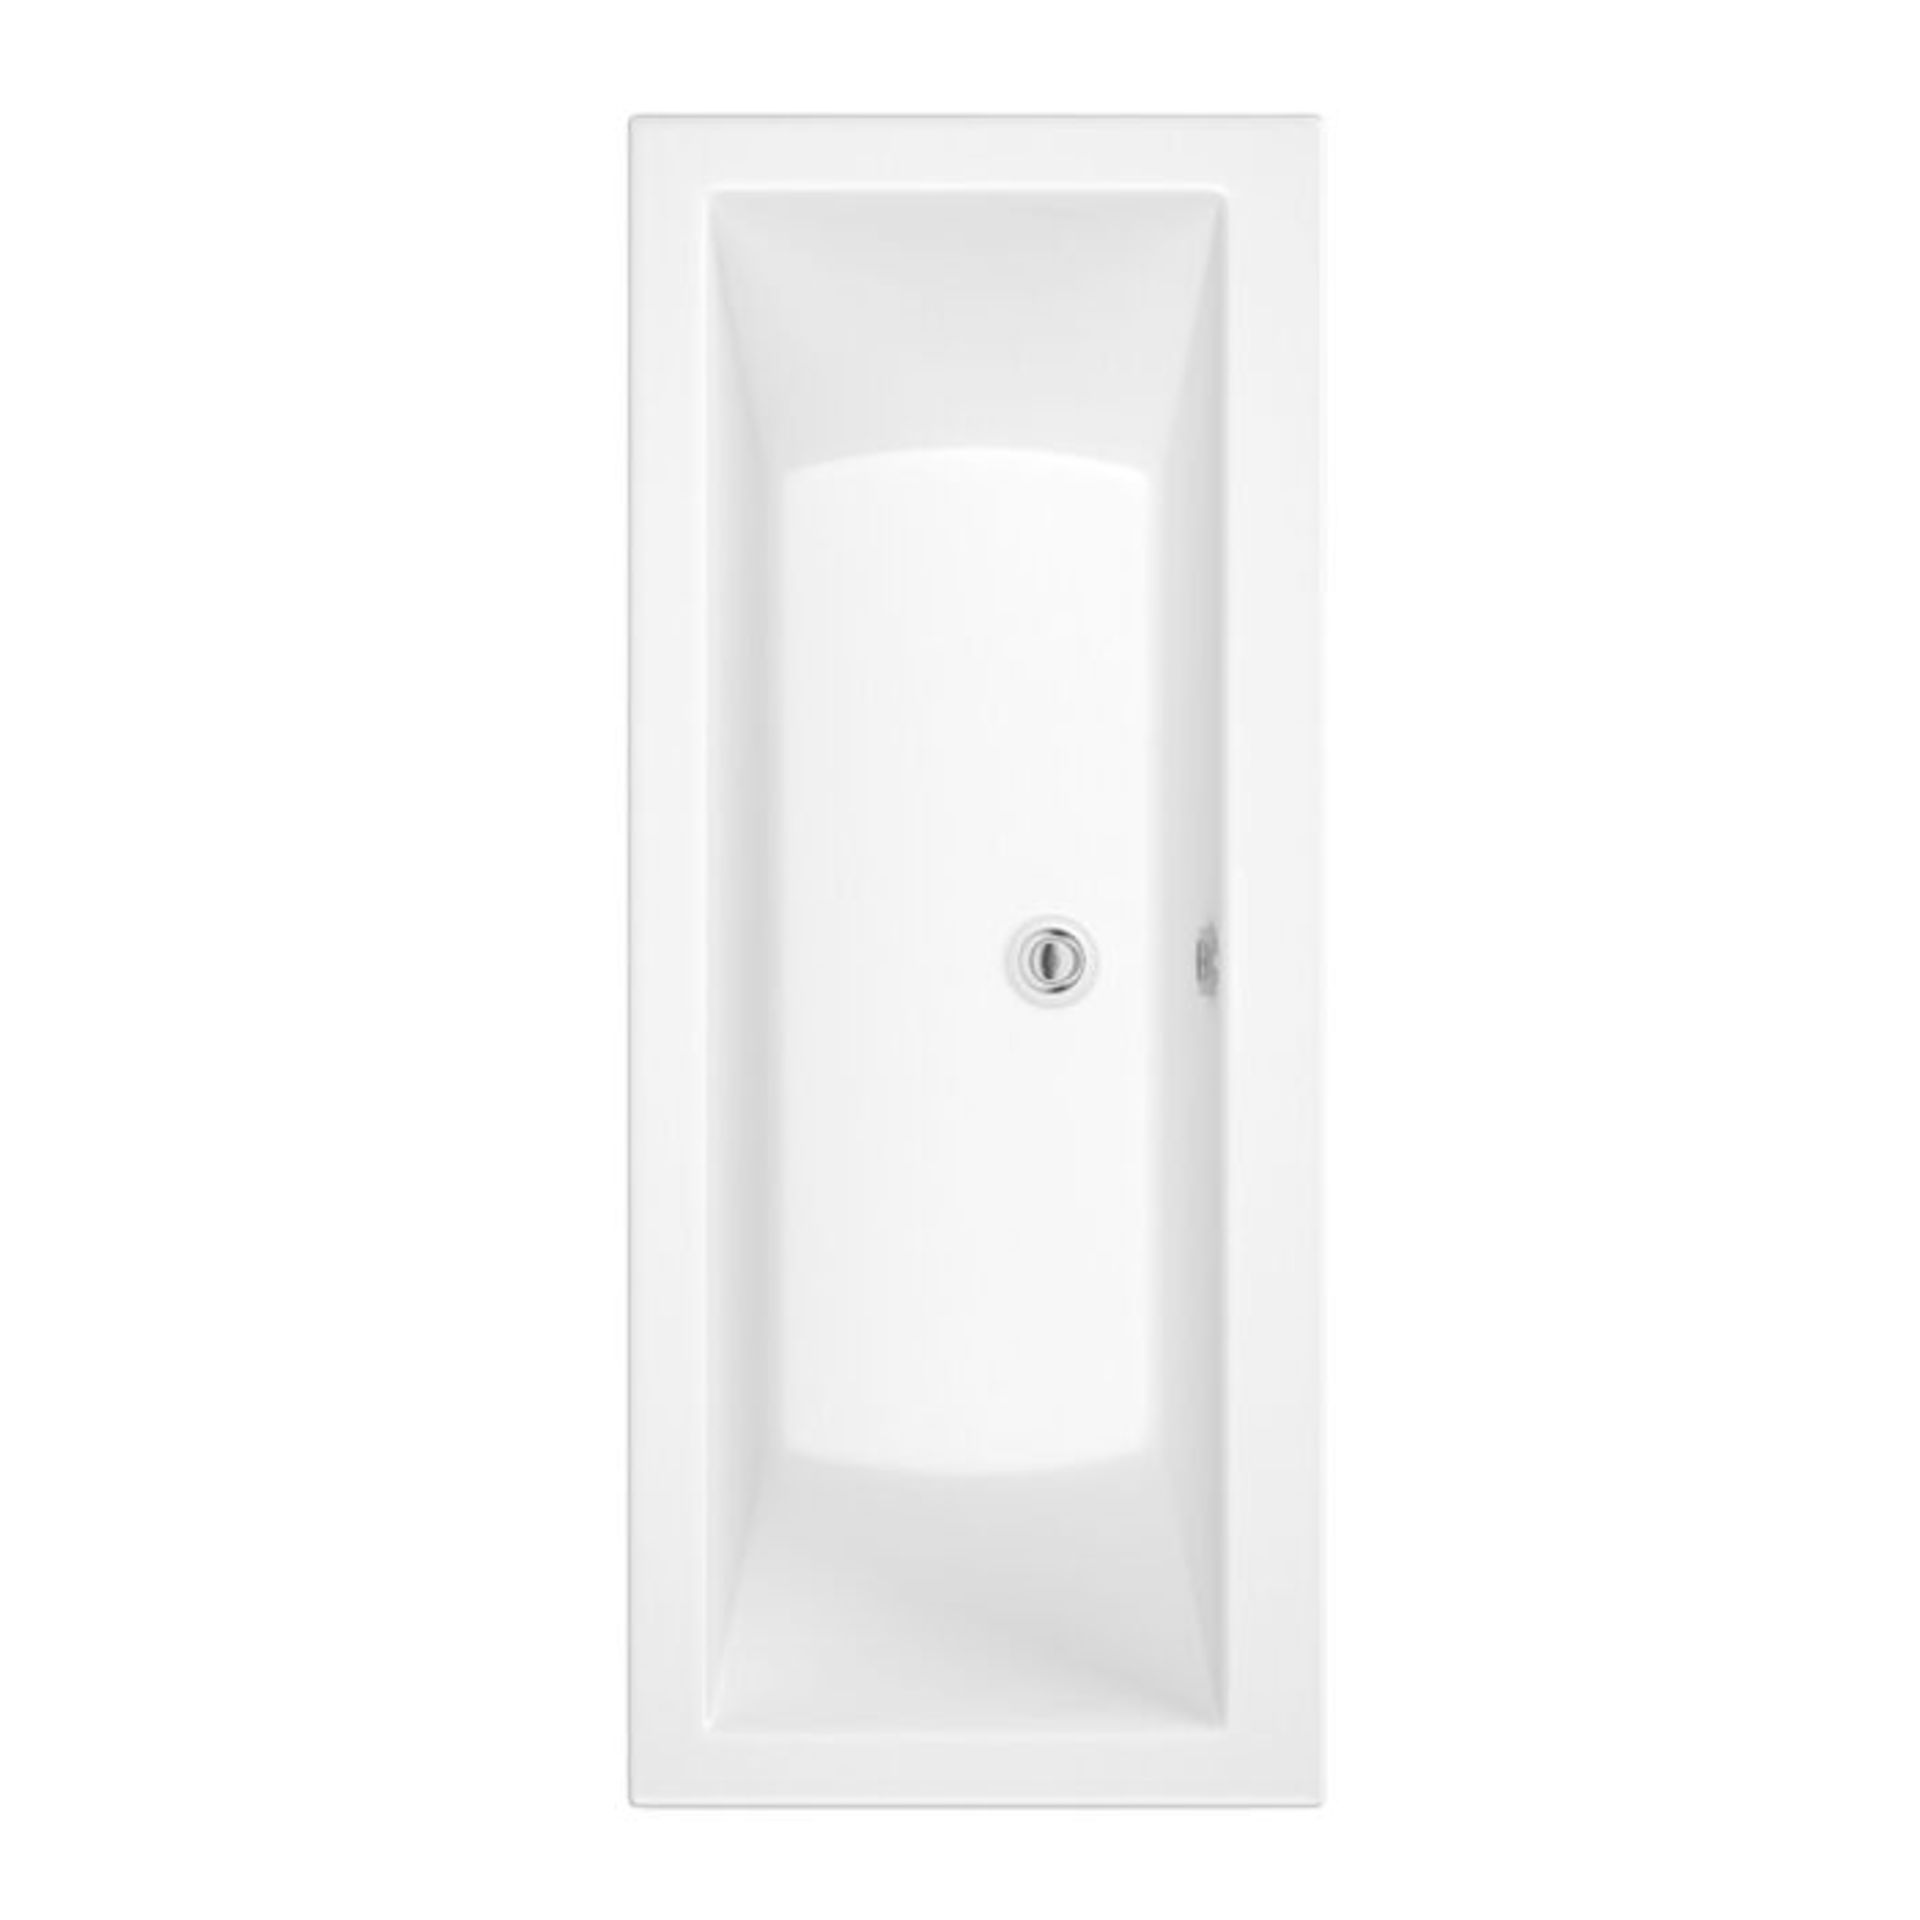 (PC100) 1800x800mm Built-in bath Double sided Rectangular. RRP £589.99 Made in the UK. reinfor...( - Image 3 of 3